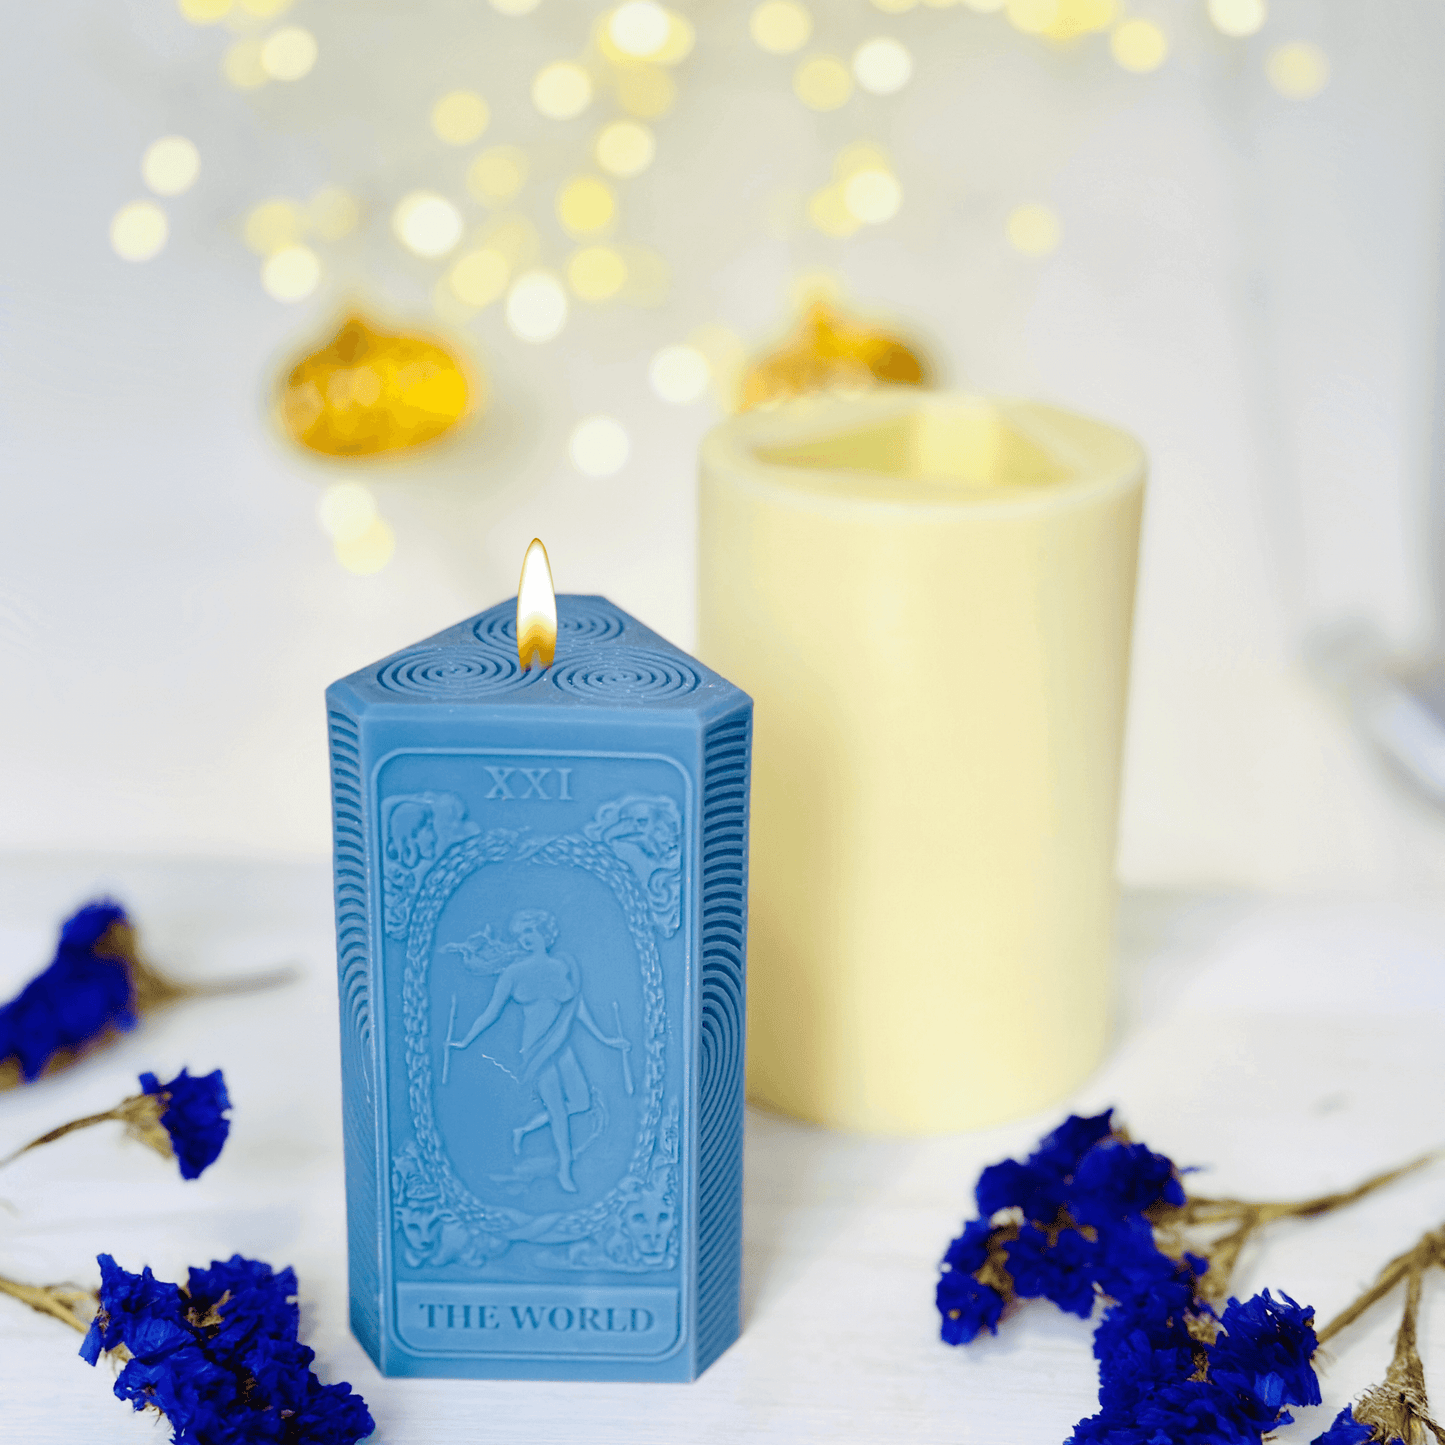 Tarot card and moon phases candle mold, The World Silicone candle mold